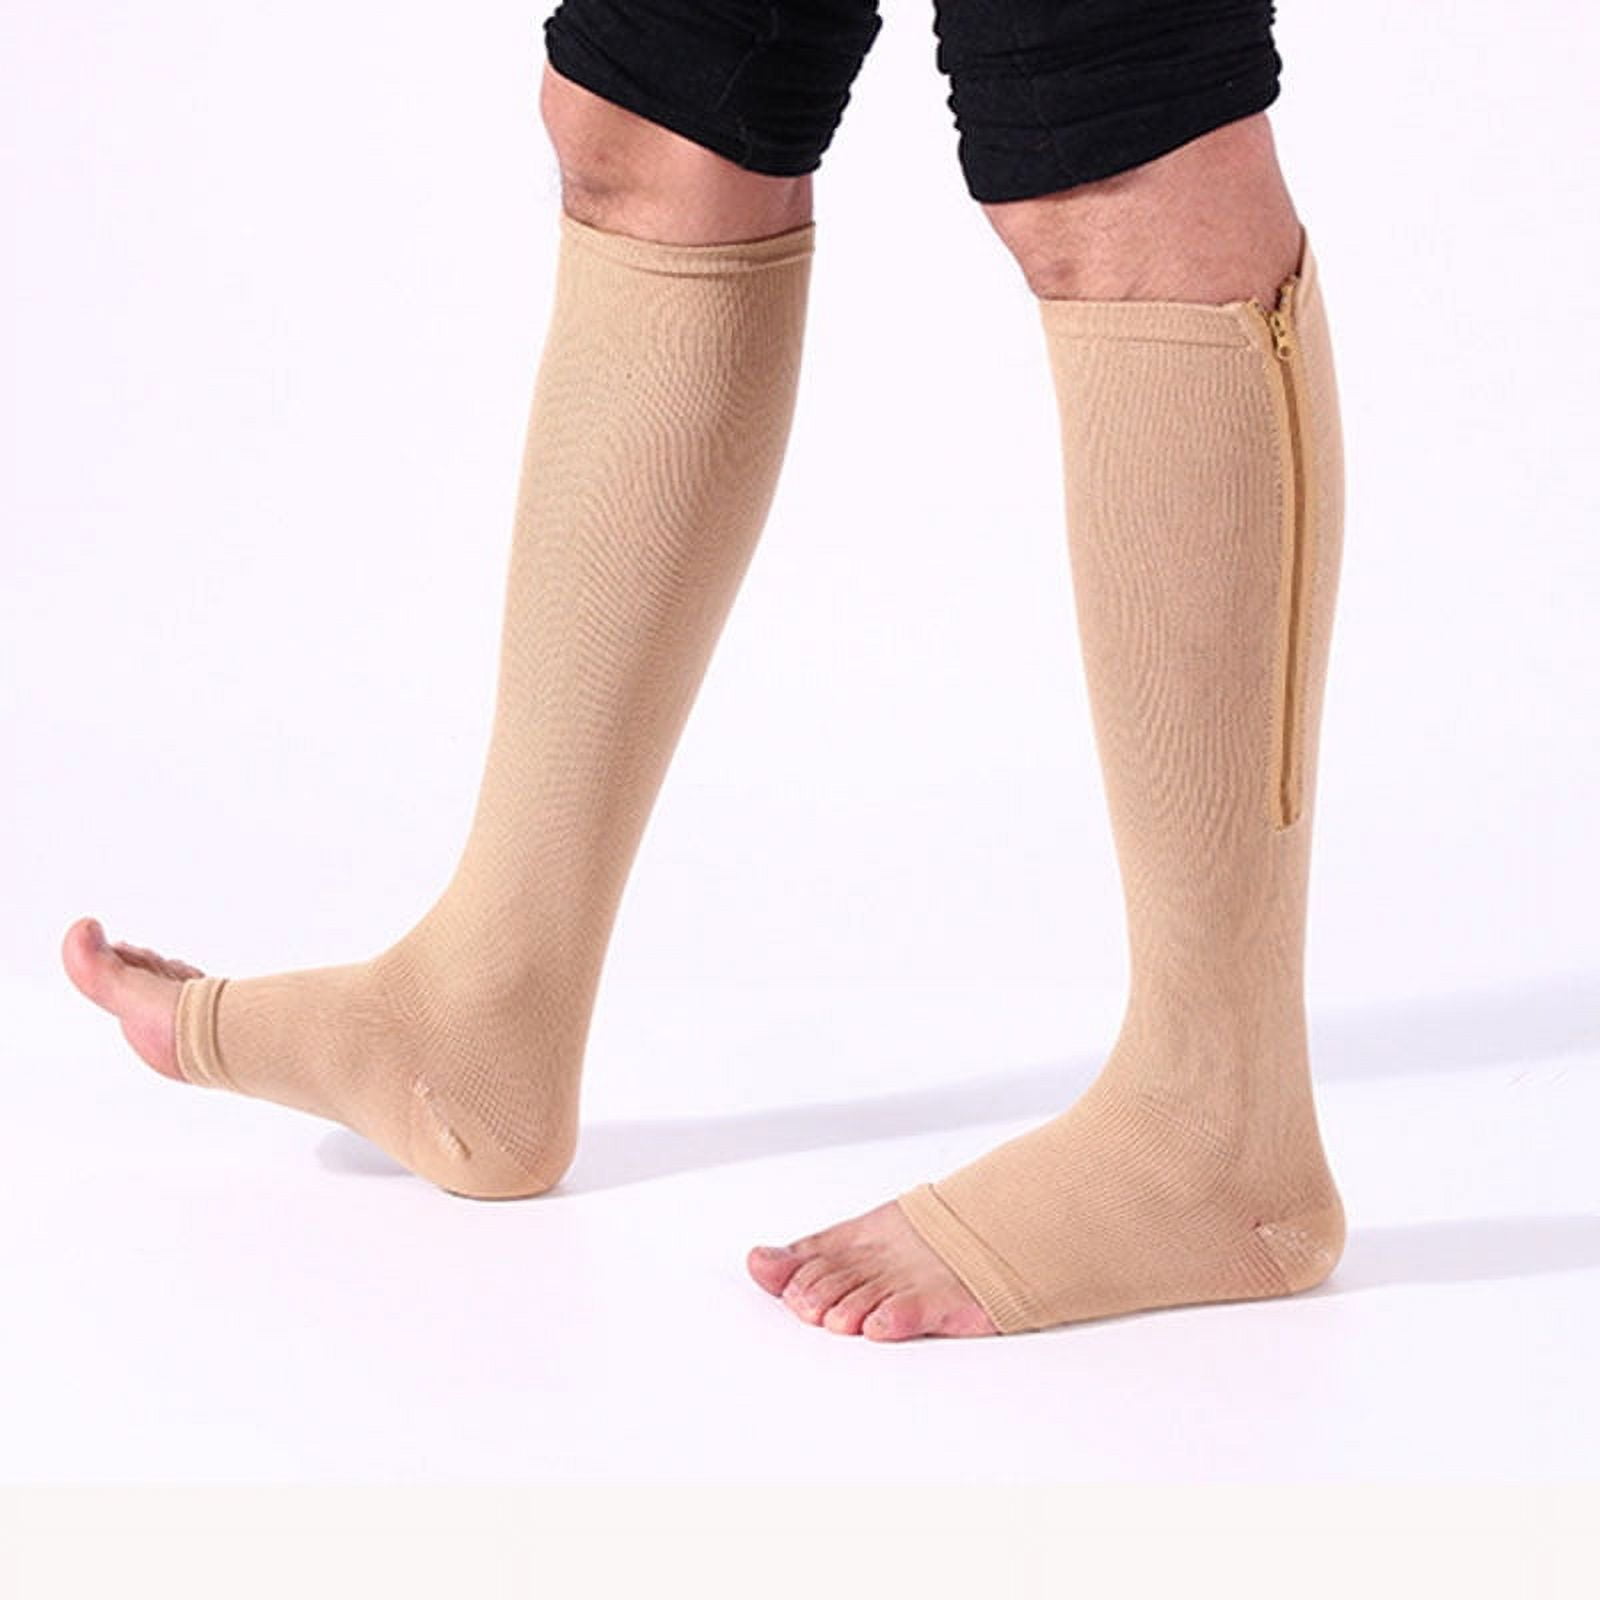 Top 5 Best Compression Socks for Varicose Veins Review in 2023 